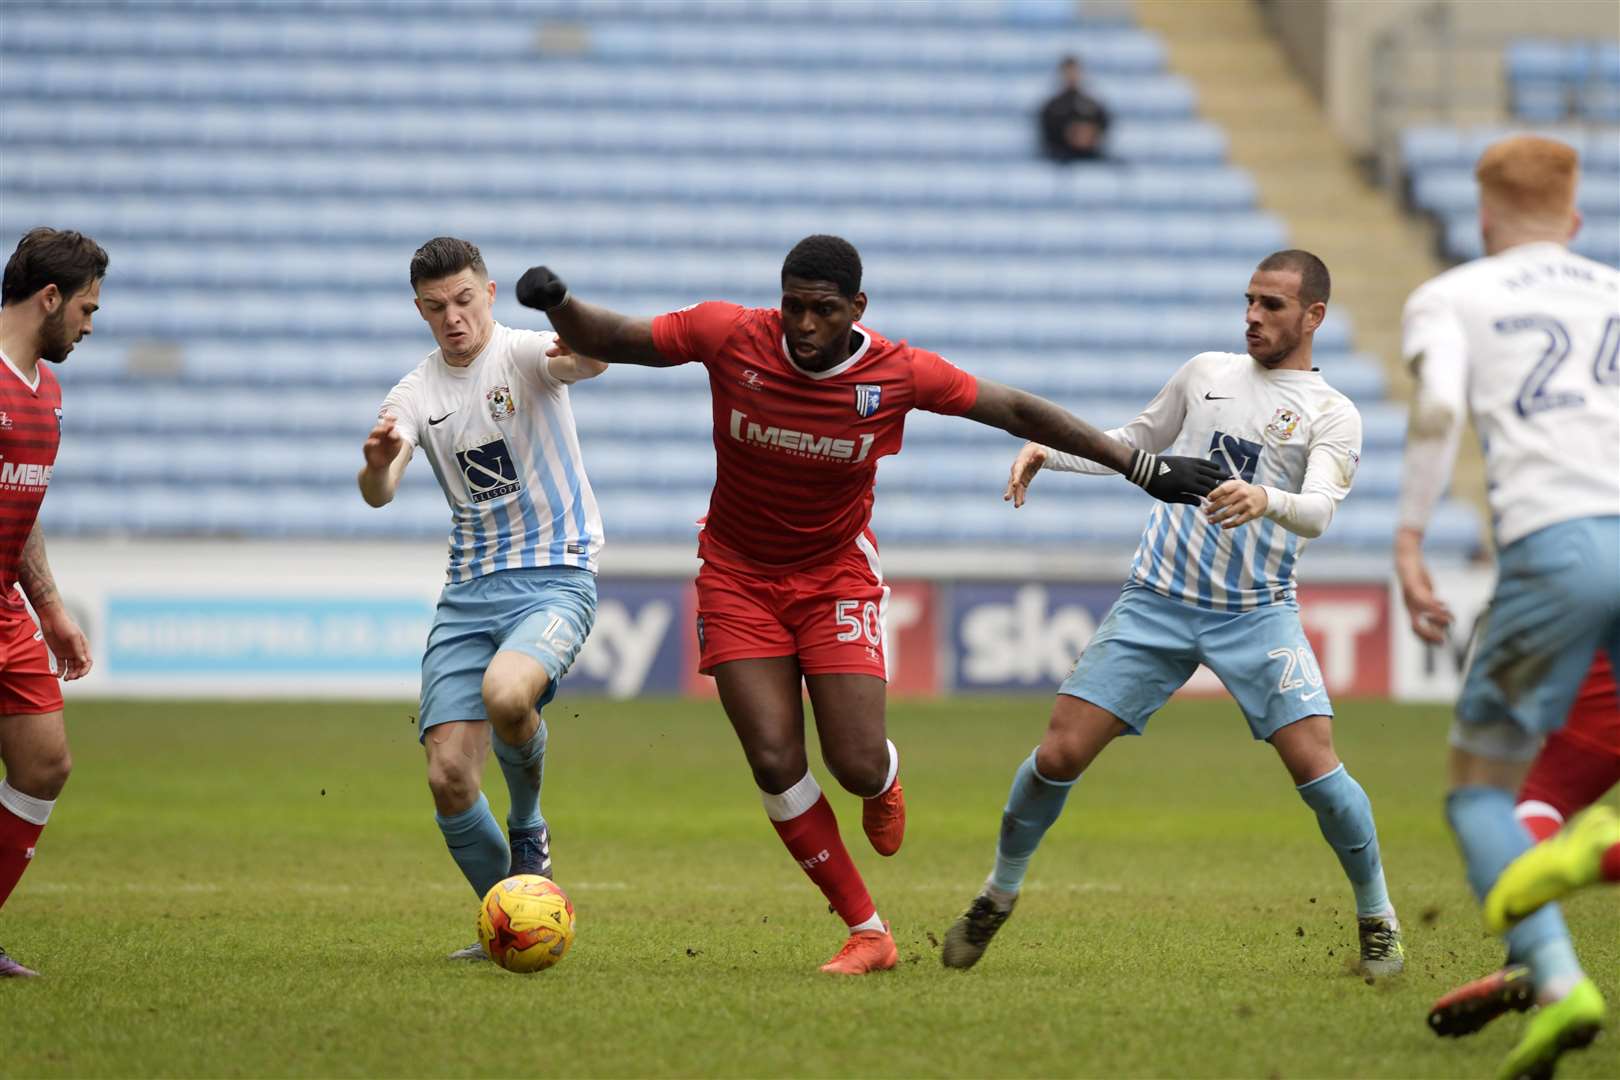 Jay Emmanuel-Thomas challenged by Callum Reilly when the Gills visited the Ricoh Arena in February 2017 Picture: Barry Goodwin